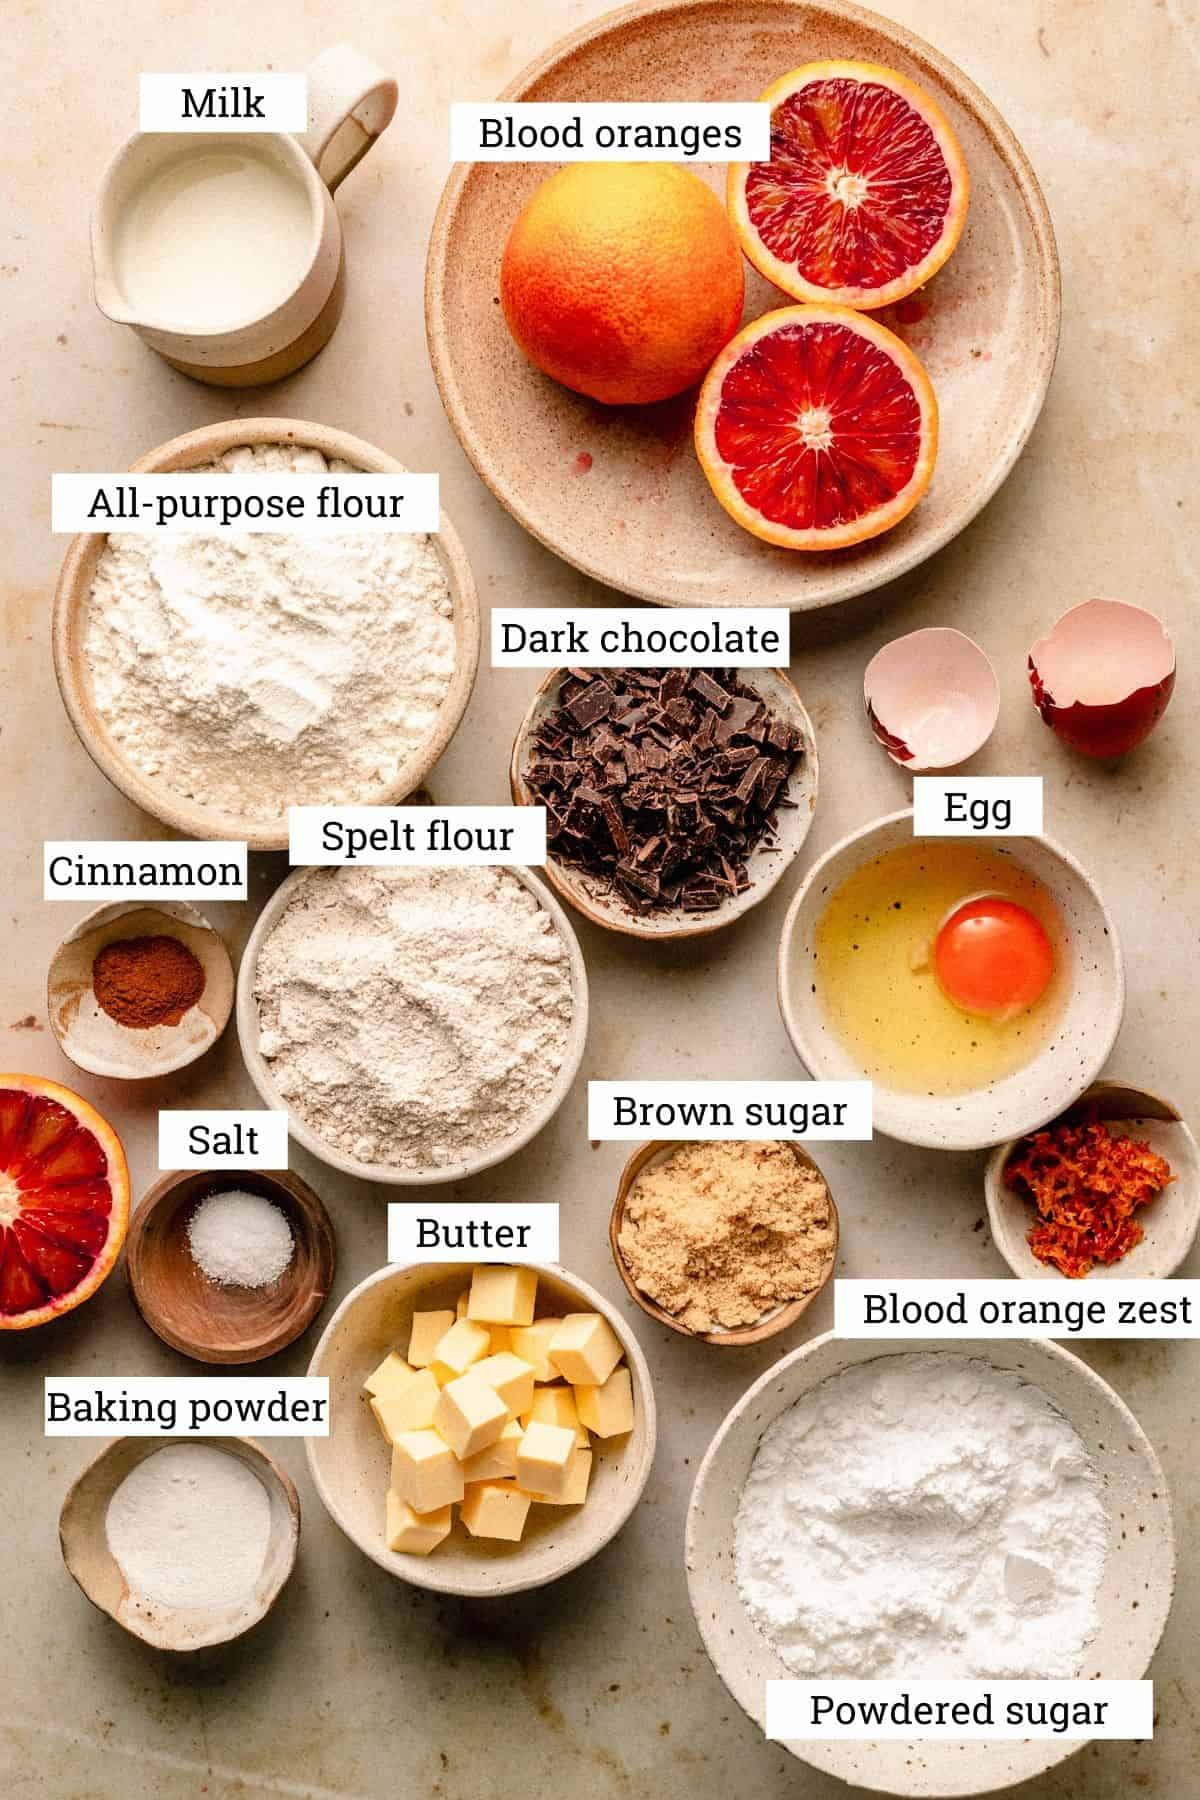 Ingredients for chocolate chip scones.